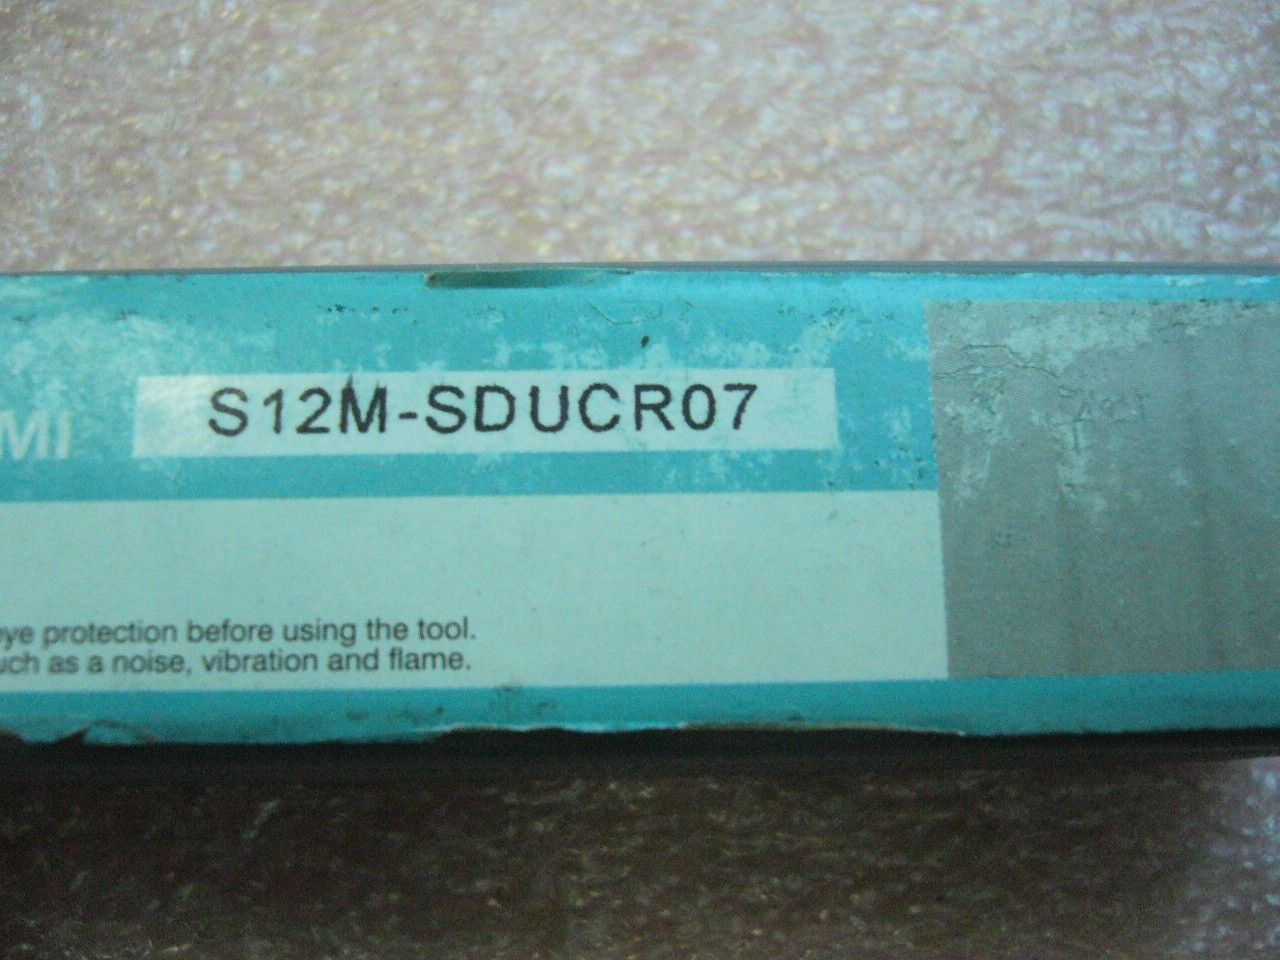 Boring Toolholder S12M-SDUCR07 for inserts DCMT0702.. DCMT21.5...